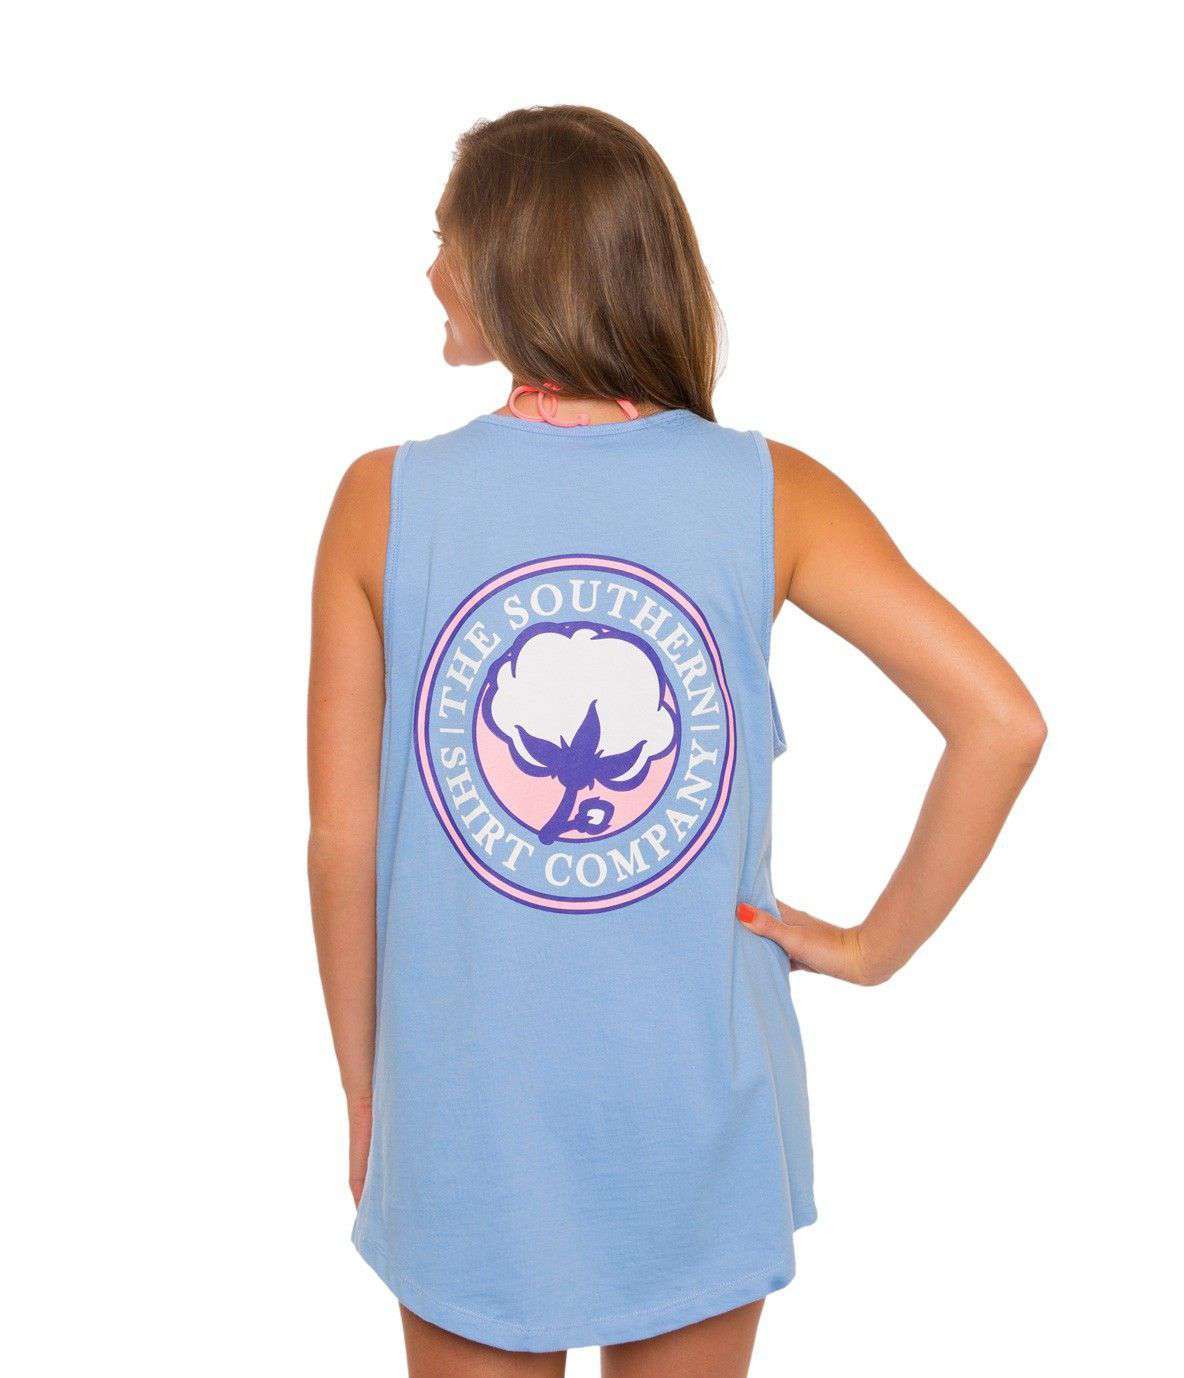 Jenny Tank in Maui Blue by The Southern Shirt Co. - Country Club Prep